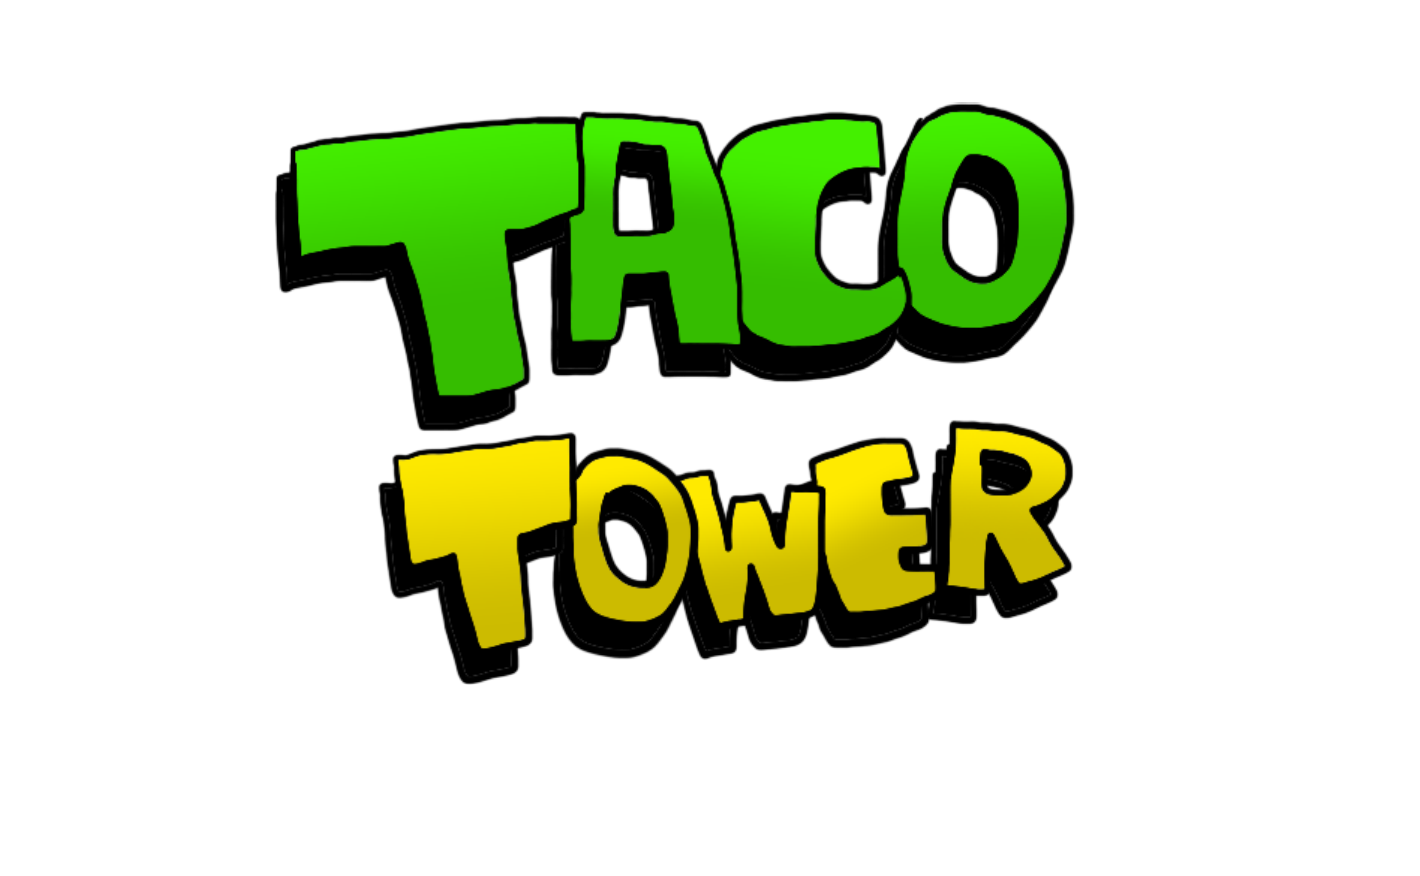 Taco Tower